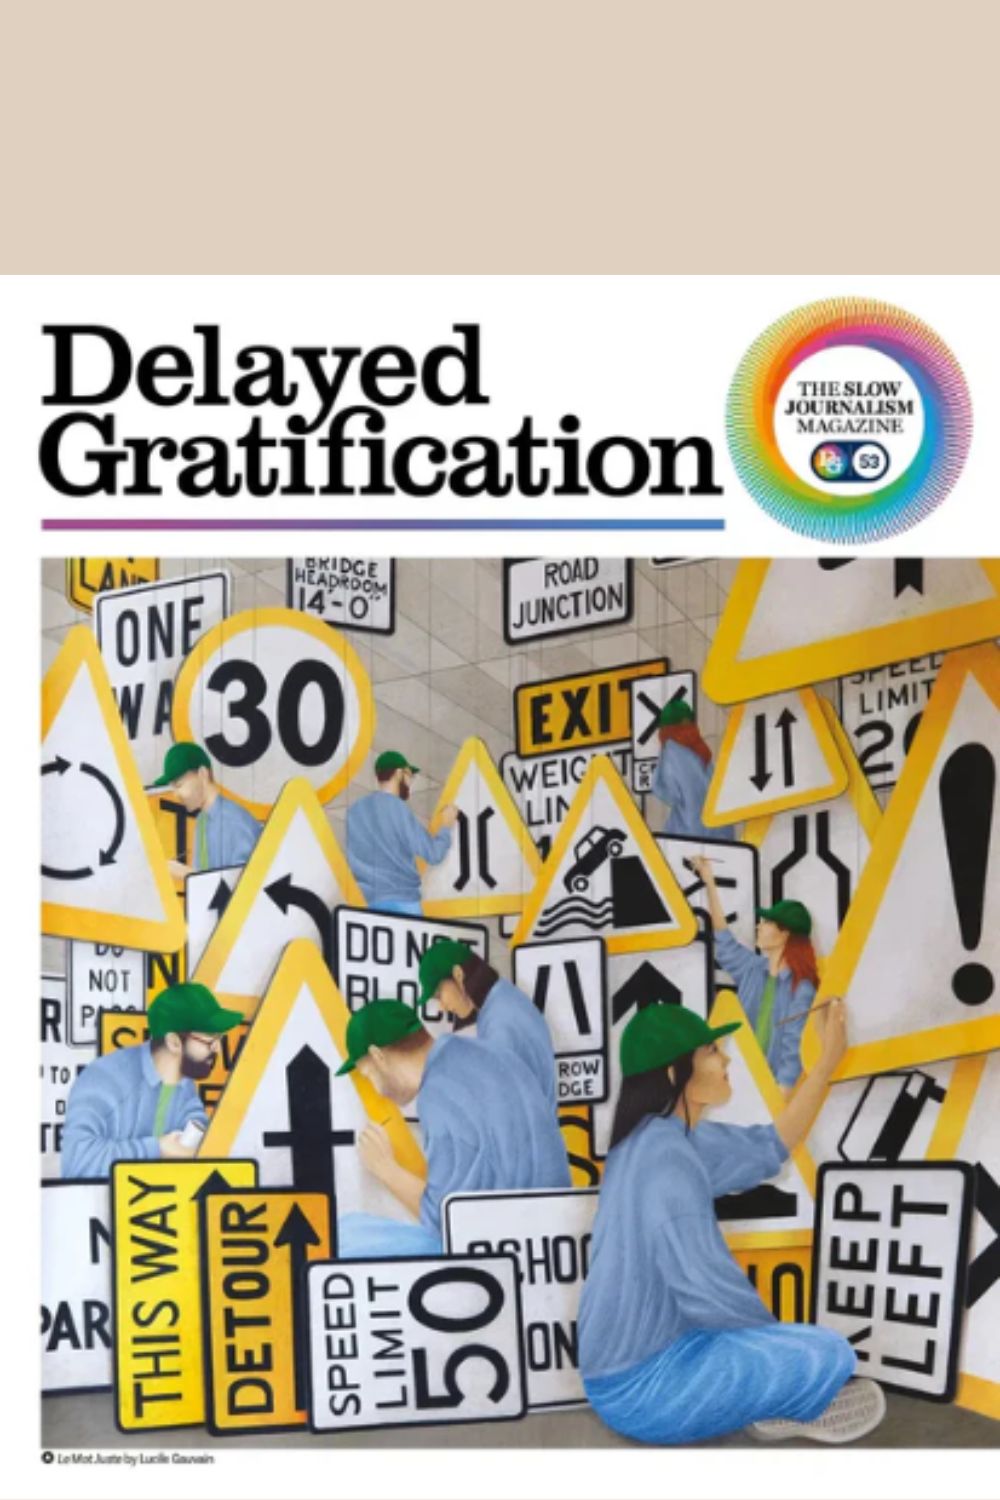 Delayed Gratification Issue 53 cover